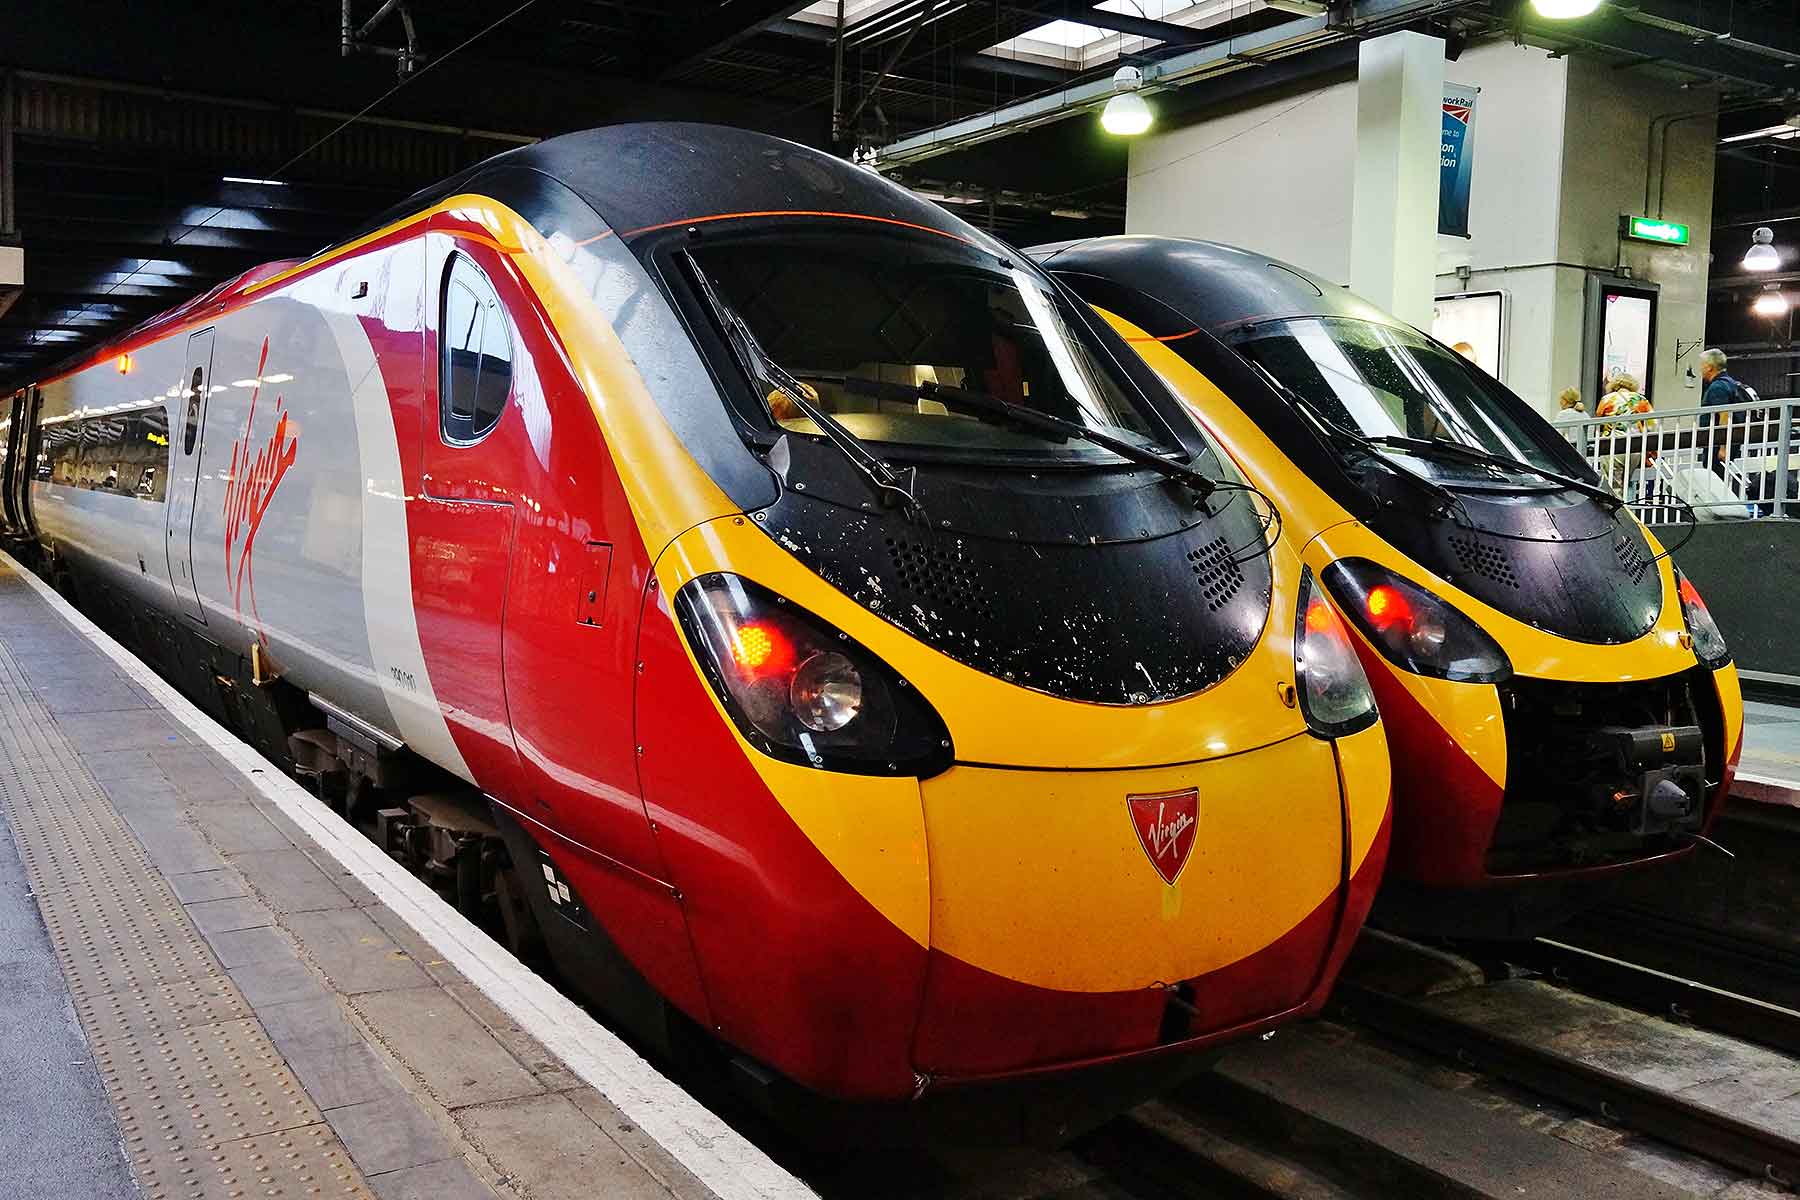 can you take dogs on virgin trains